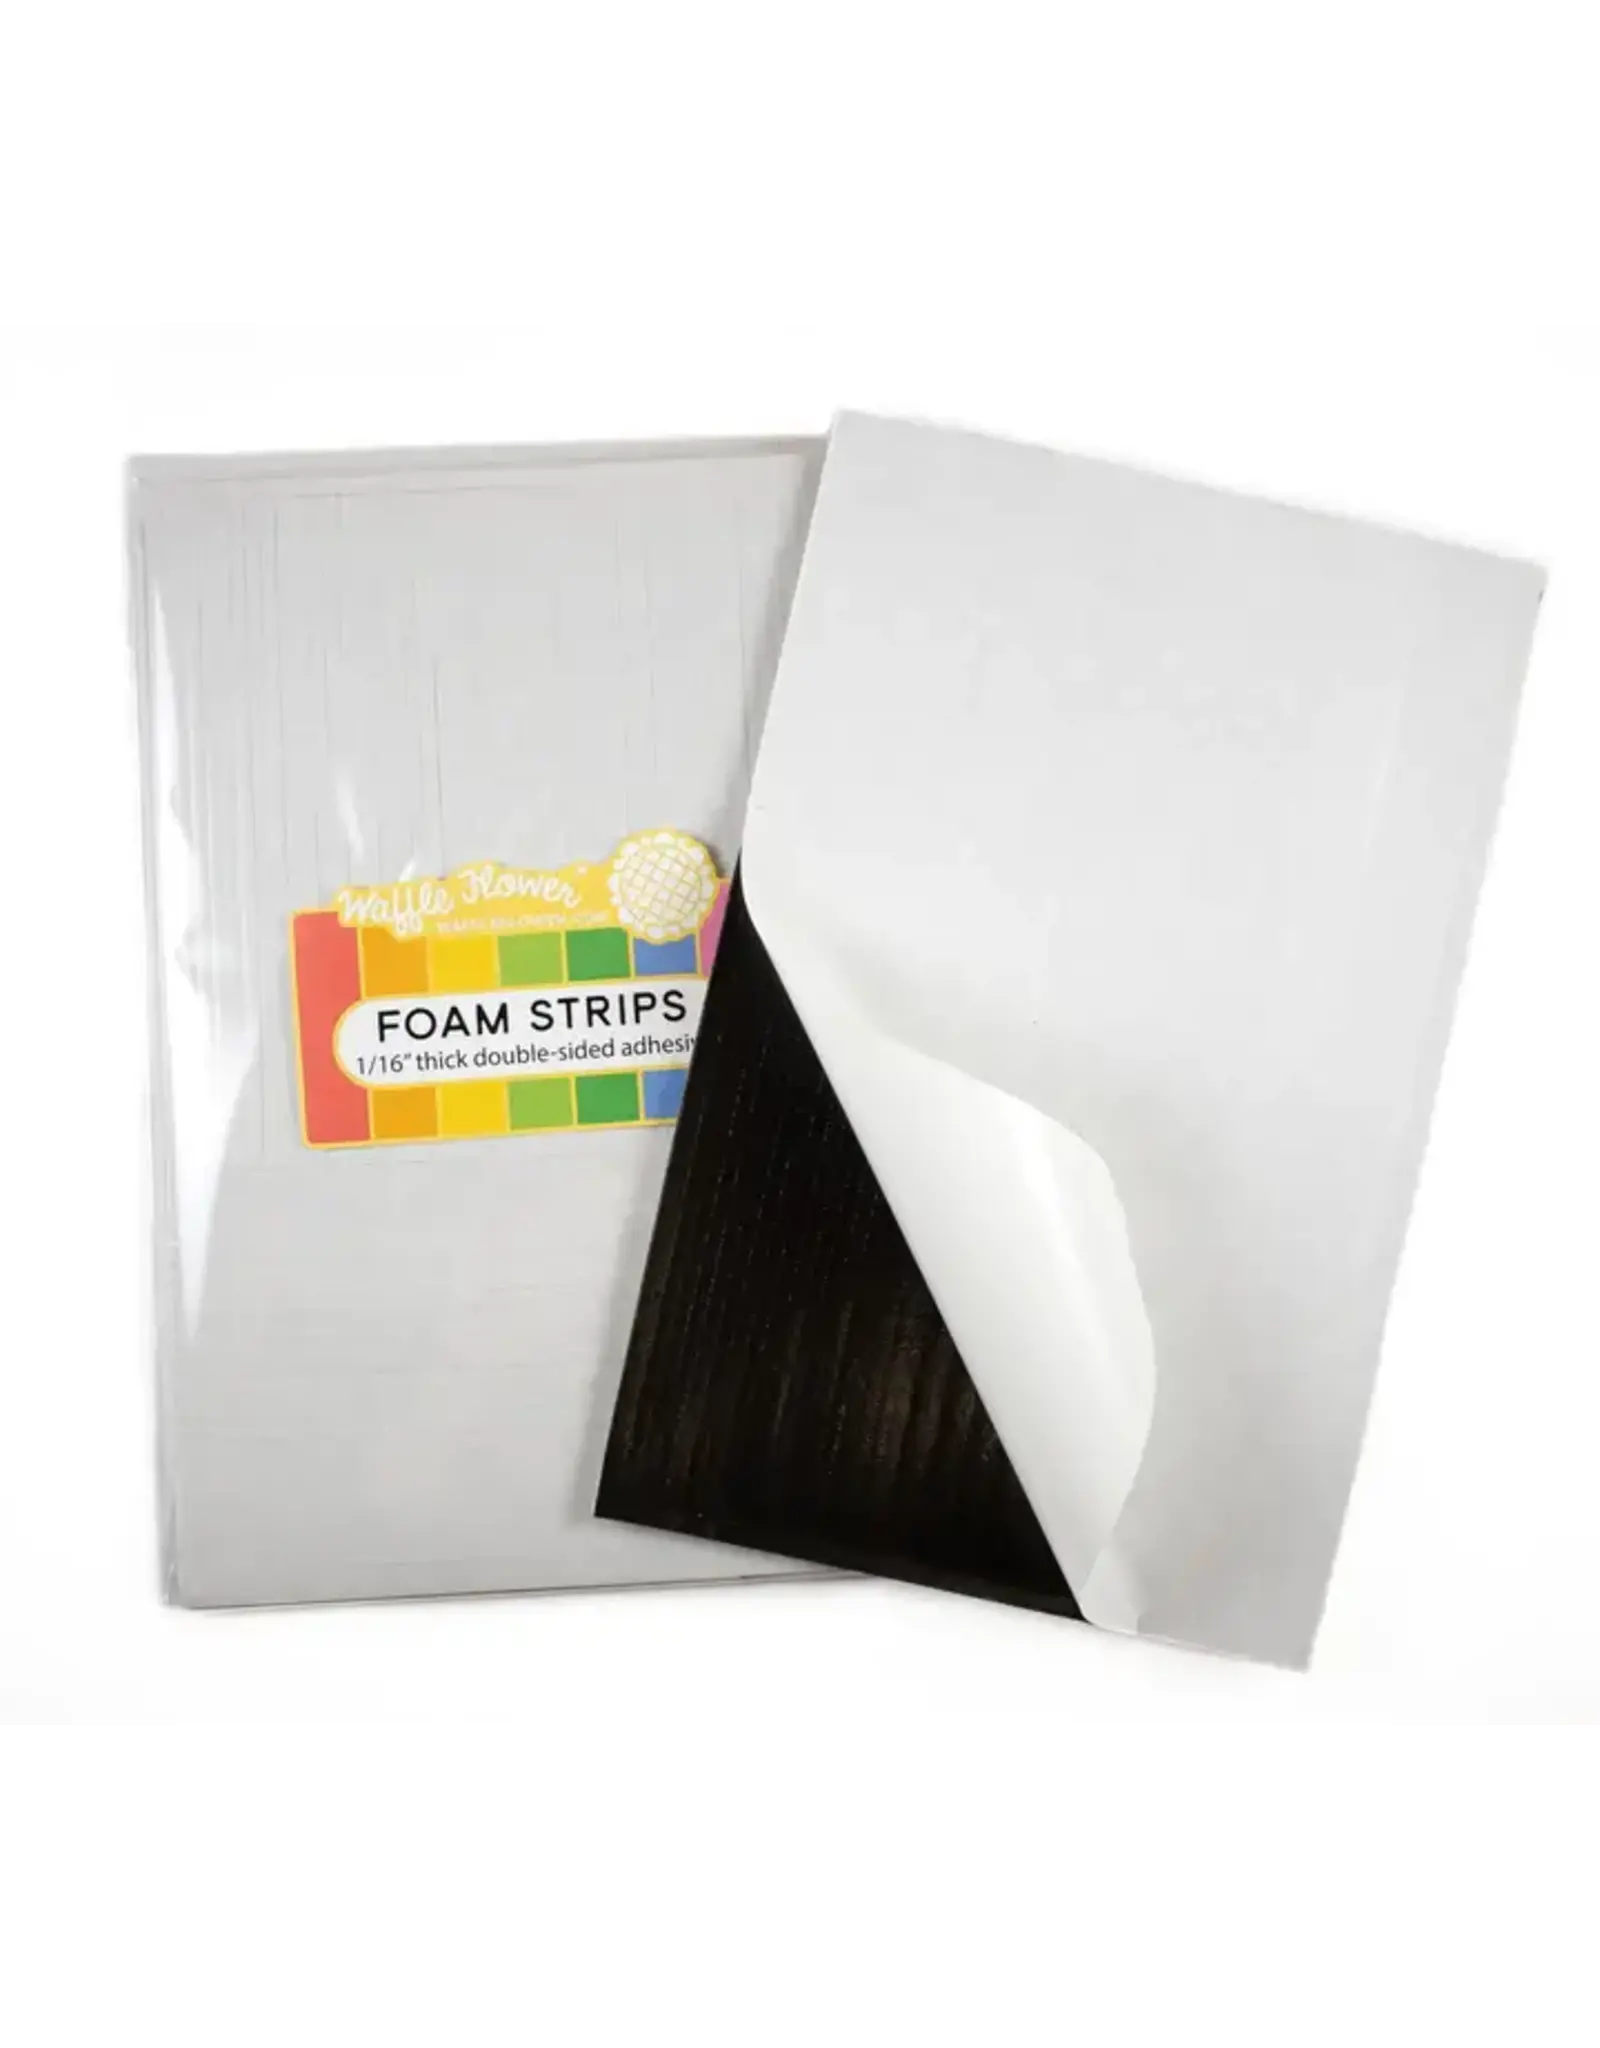 WAFFLE FLOWER WAFFLE FLOWER 1/16" THICK DOUBLE SIDED ADHESIVE BLACK FOAM STRIPS